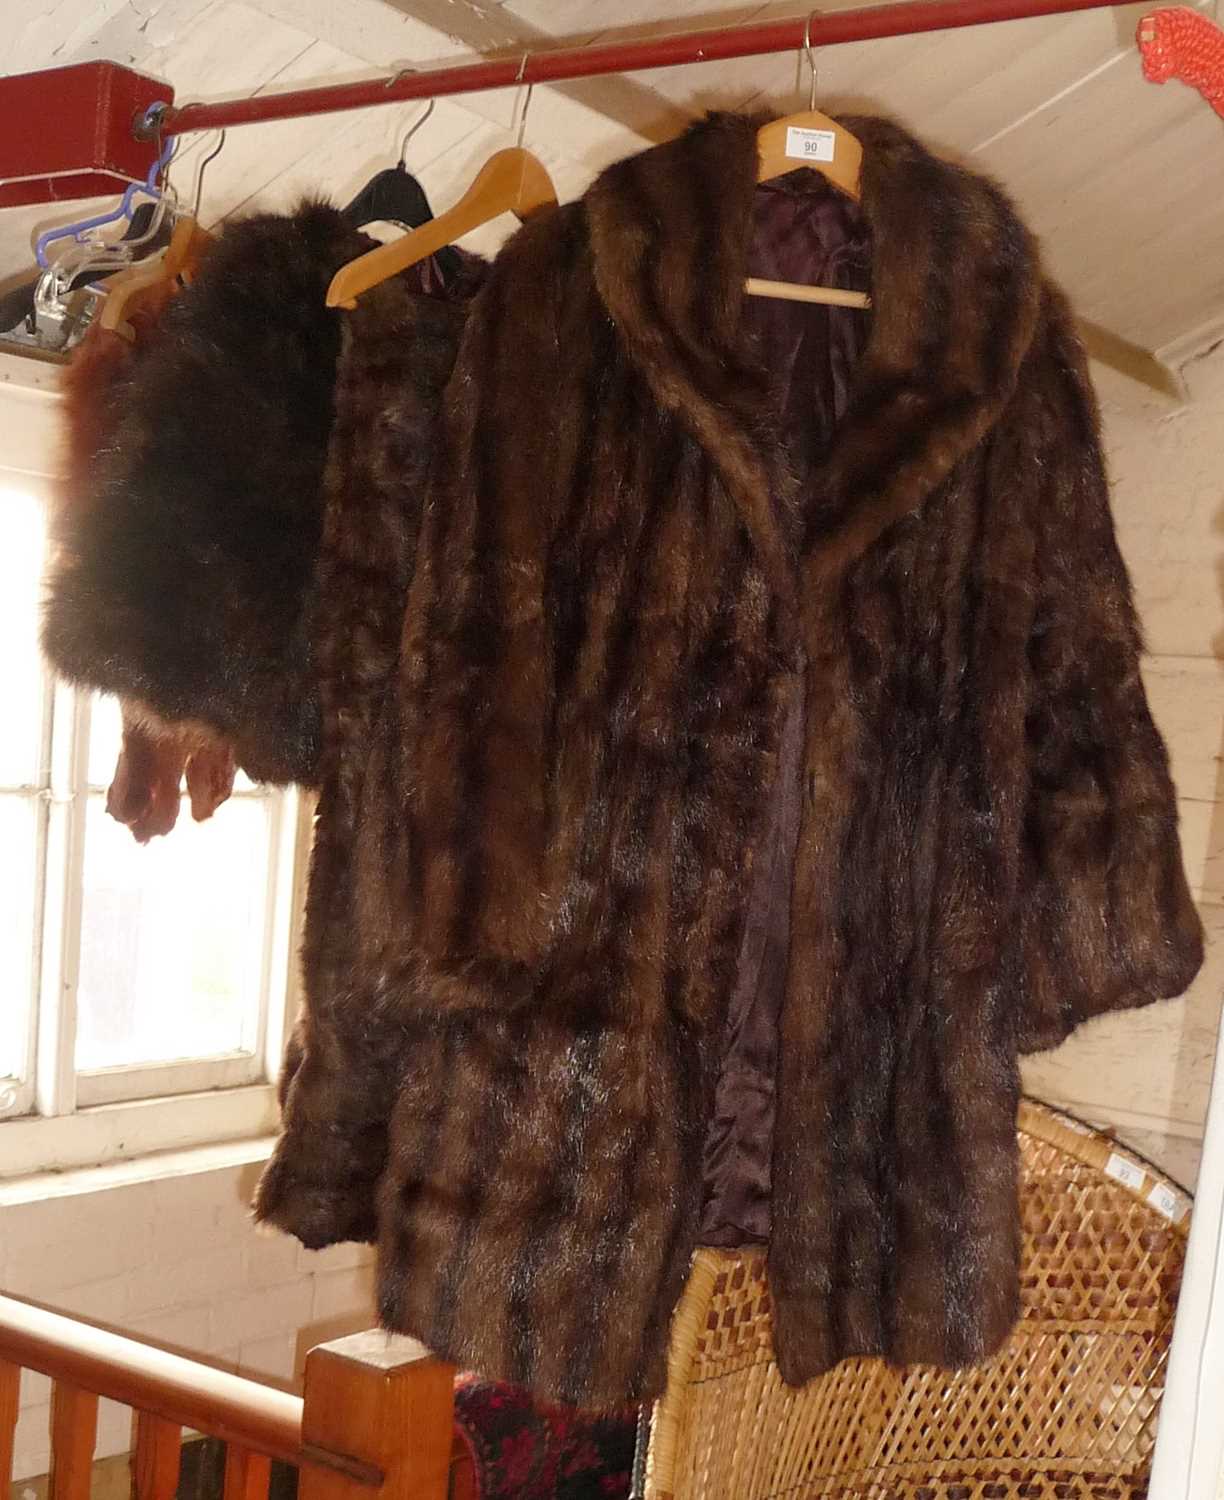 Vintage clothing - ladies fur coat by Harry Fish of Chesterfield, a fur stole, a fur wrap and